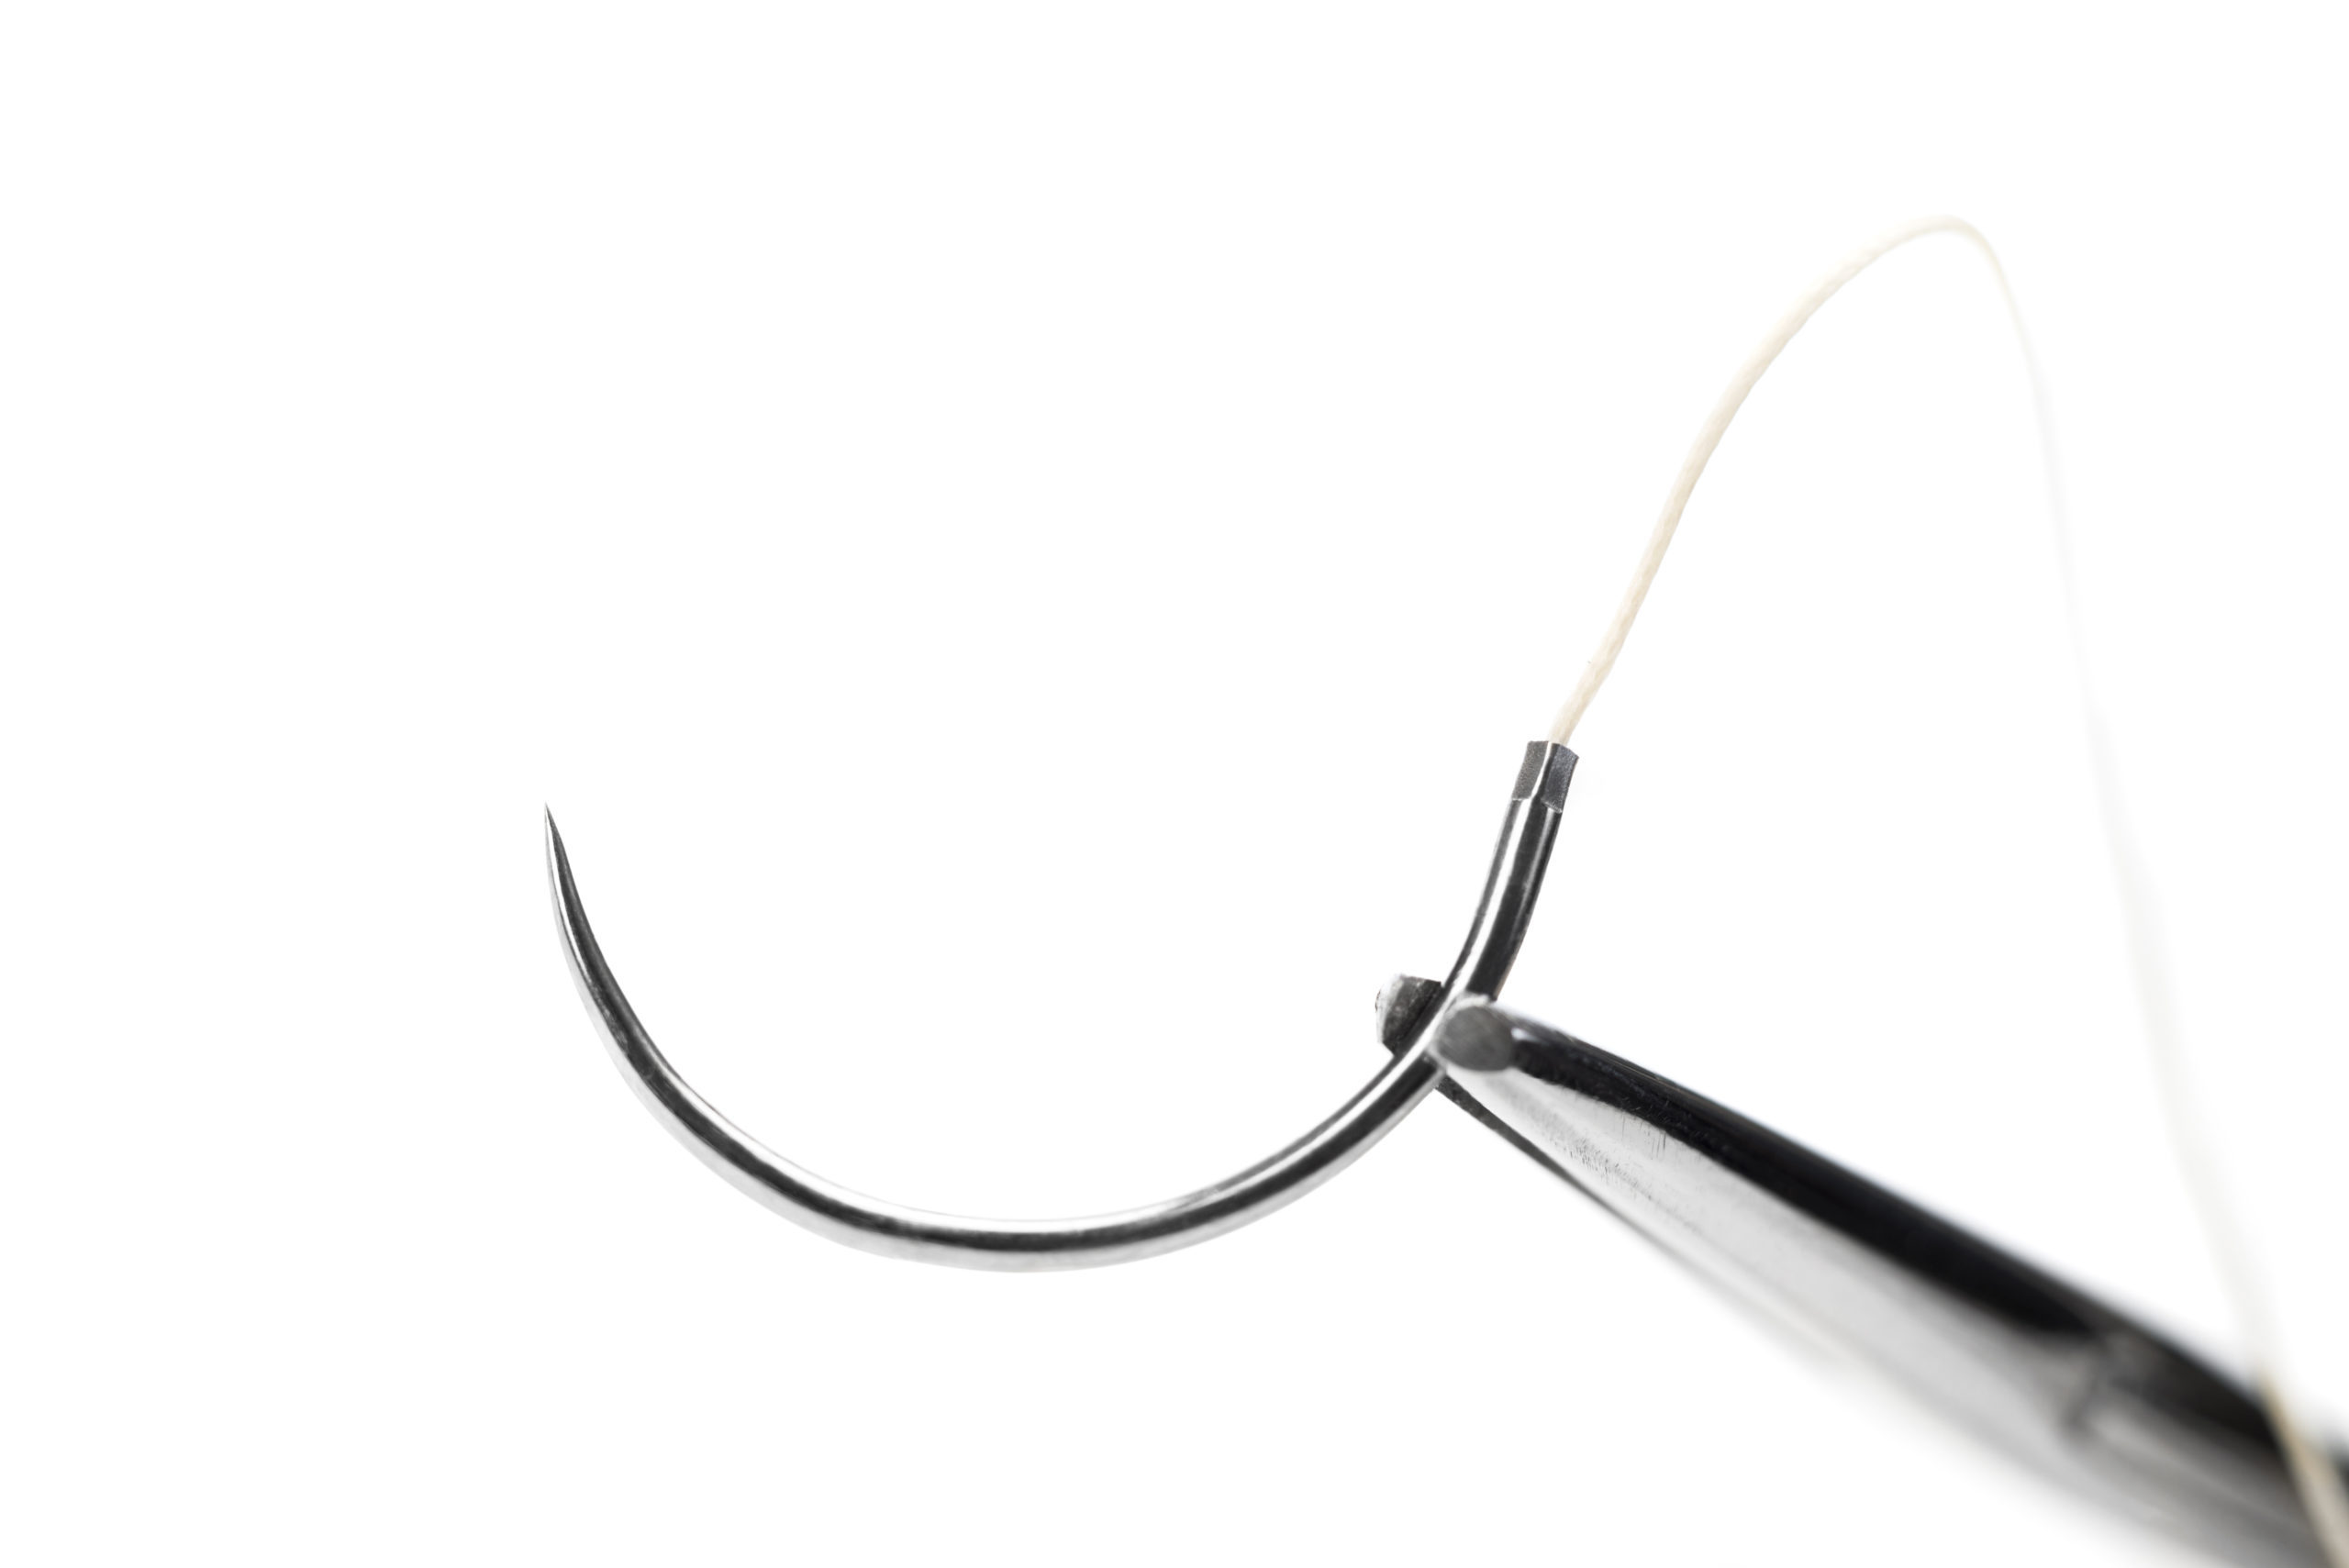 A suture needle with 2-0 synthetic adsorbable thread, being held by Kelly Forceps agaisnt a white background